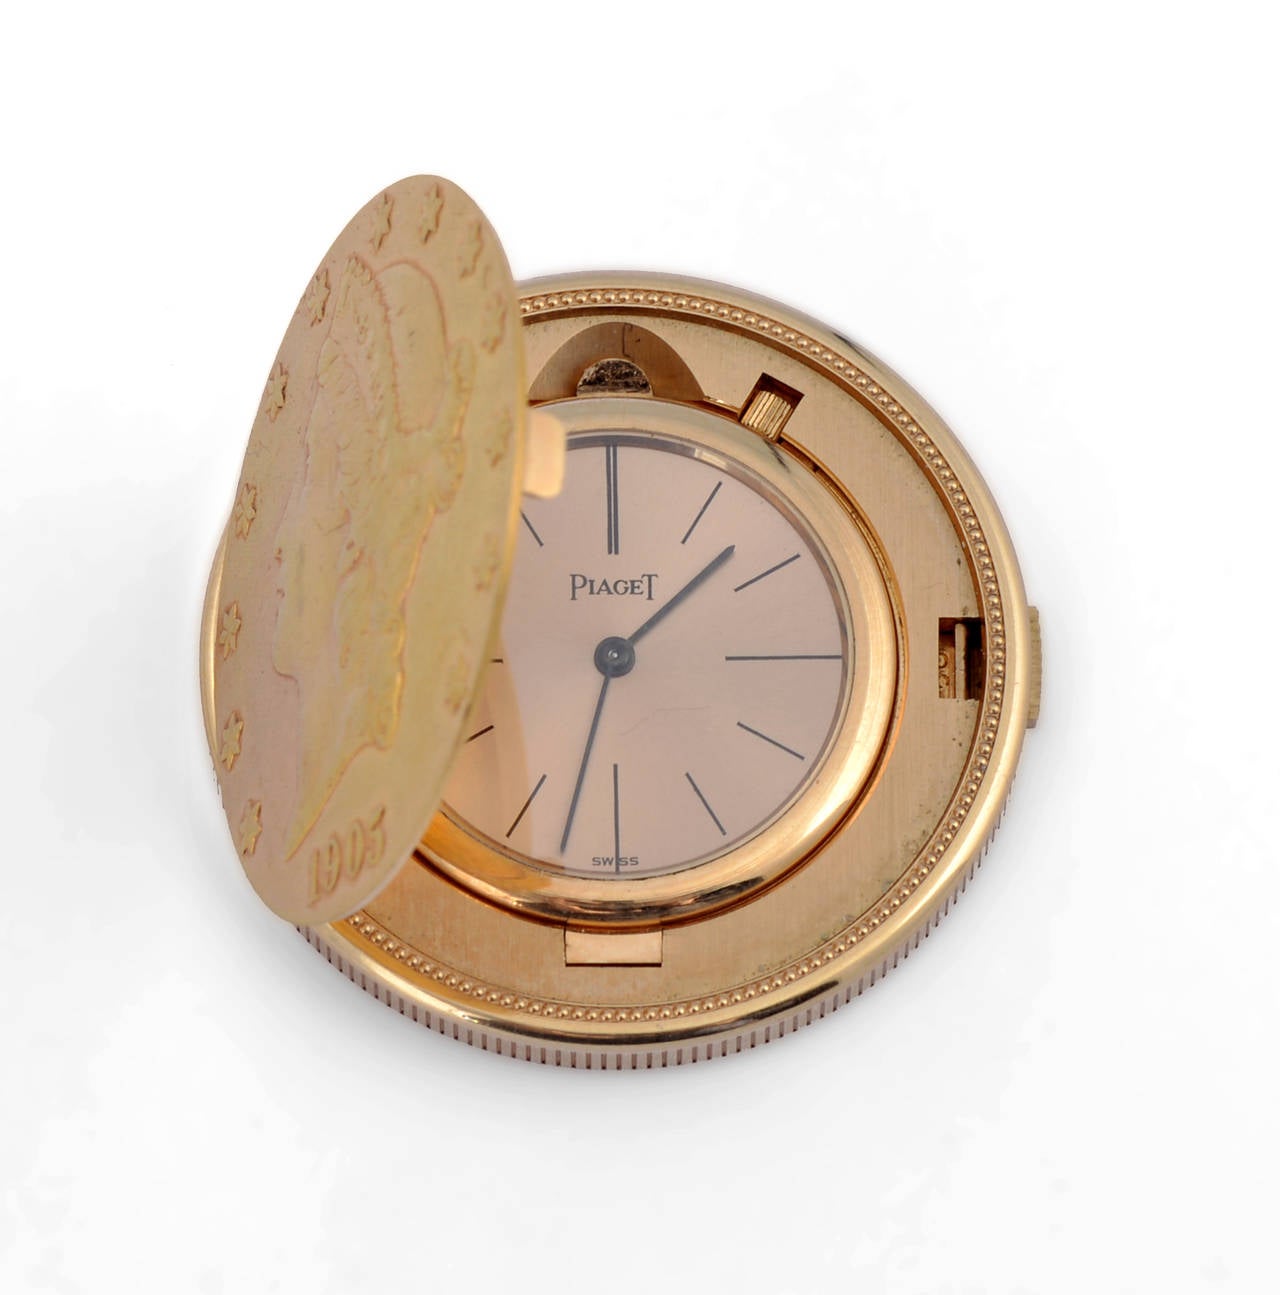 An 18-karat yellow gold coin-form Piaget watch or case-spring coin watch.
18 jewels.
Five adjustments to temperature.
Gilt dial, baton numerals and hands.
A 1905, US 20$ coin piece partially hollowed so as to house a slender gold hinged case